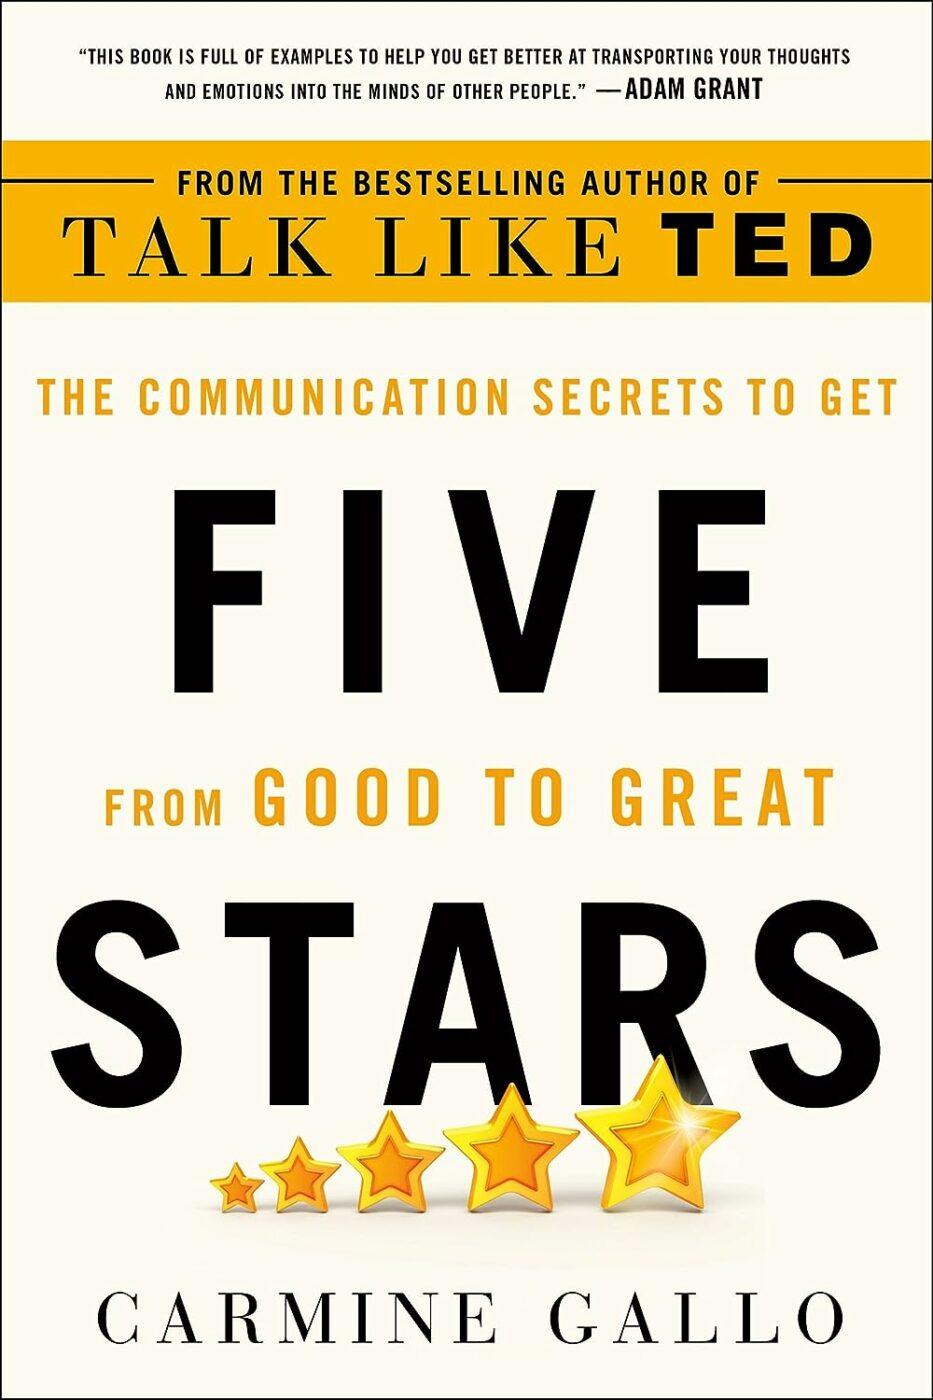  Five Stars: The Communication Secrets to Get from Good to Great by Carmine Gallo counts among the most popular communication skills books